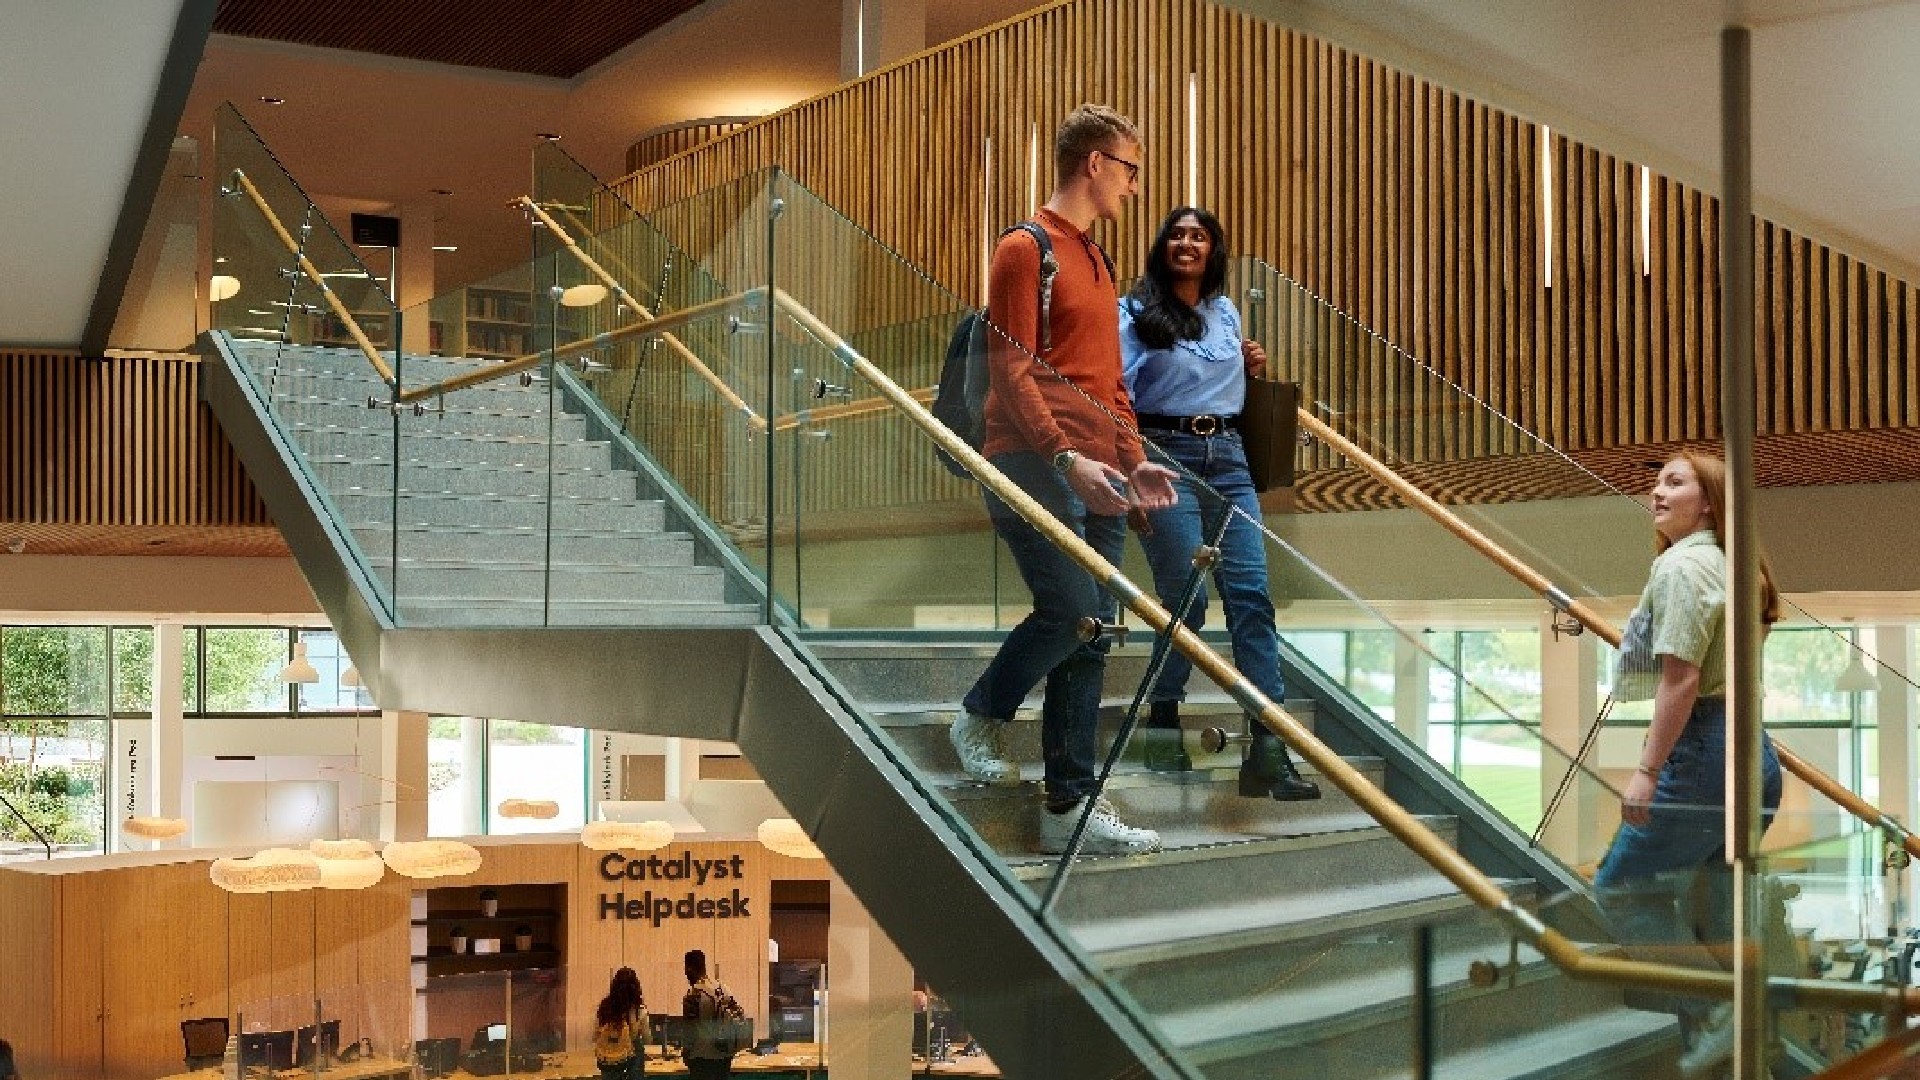 Students are walking down the stairs in the Universities Catalyst building.